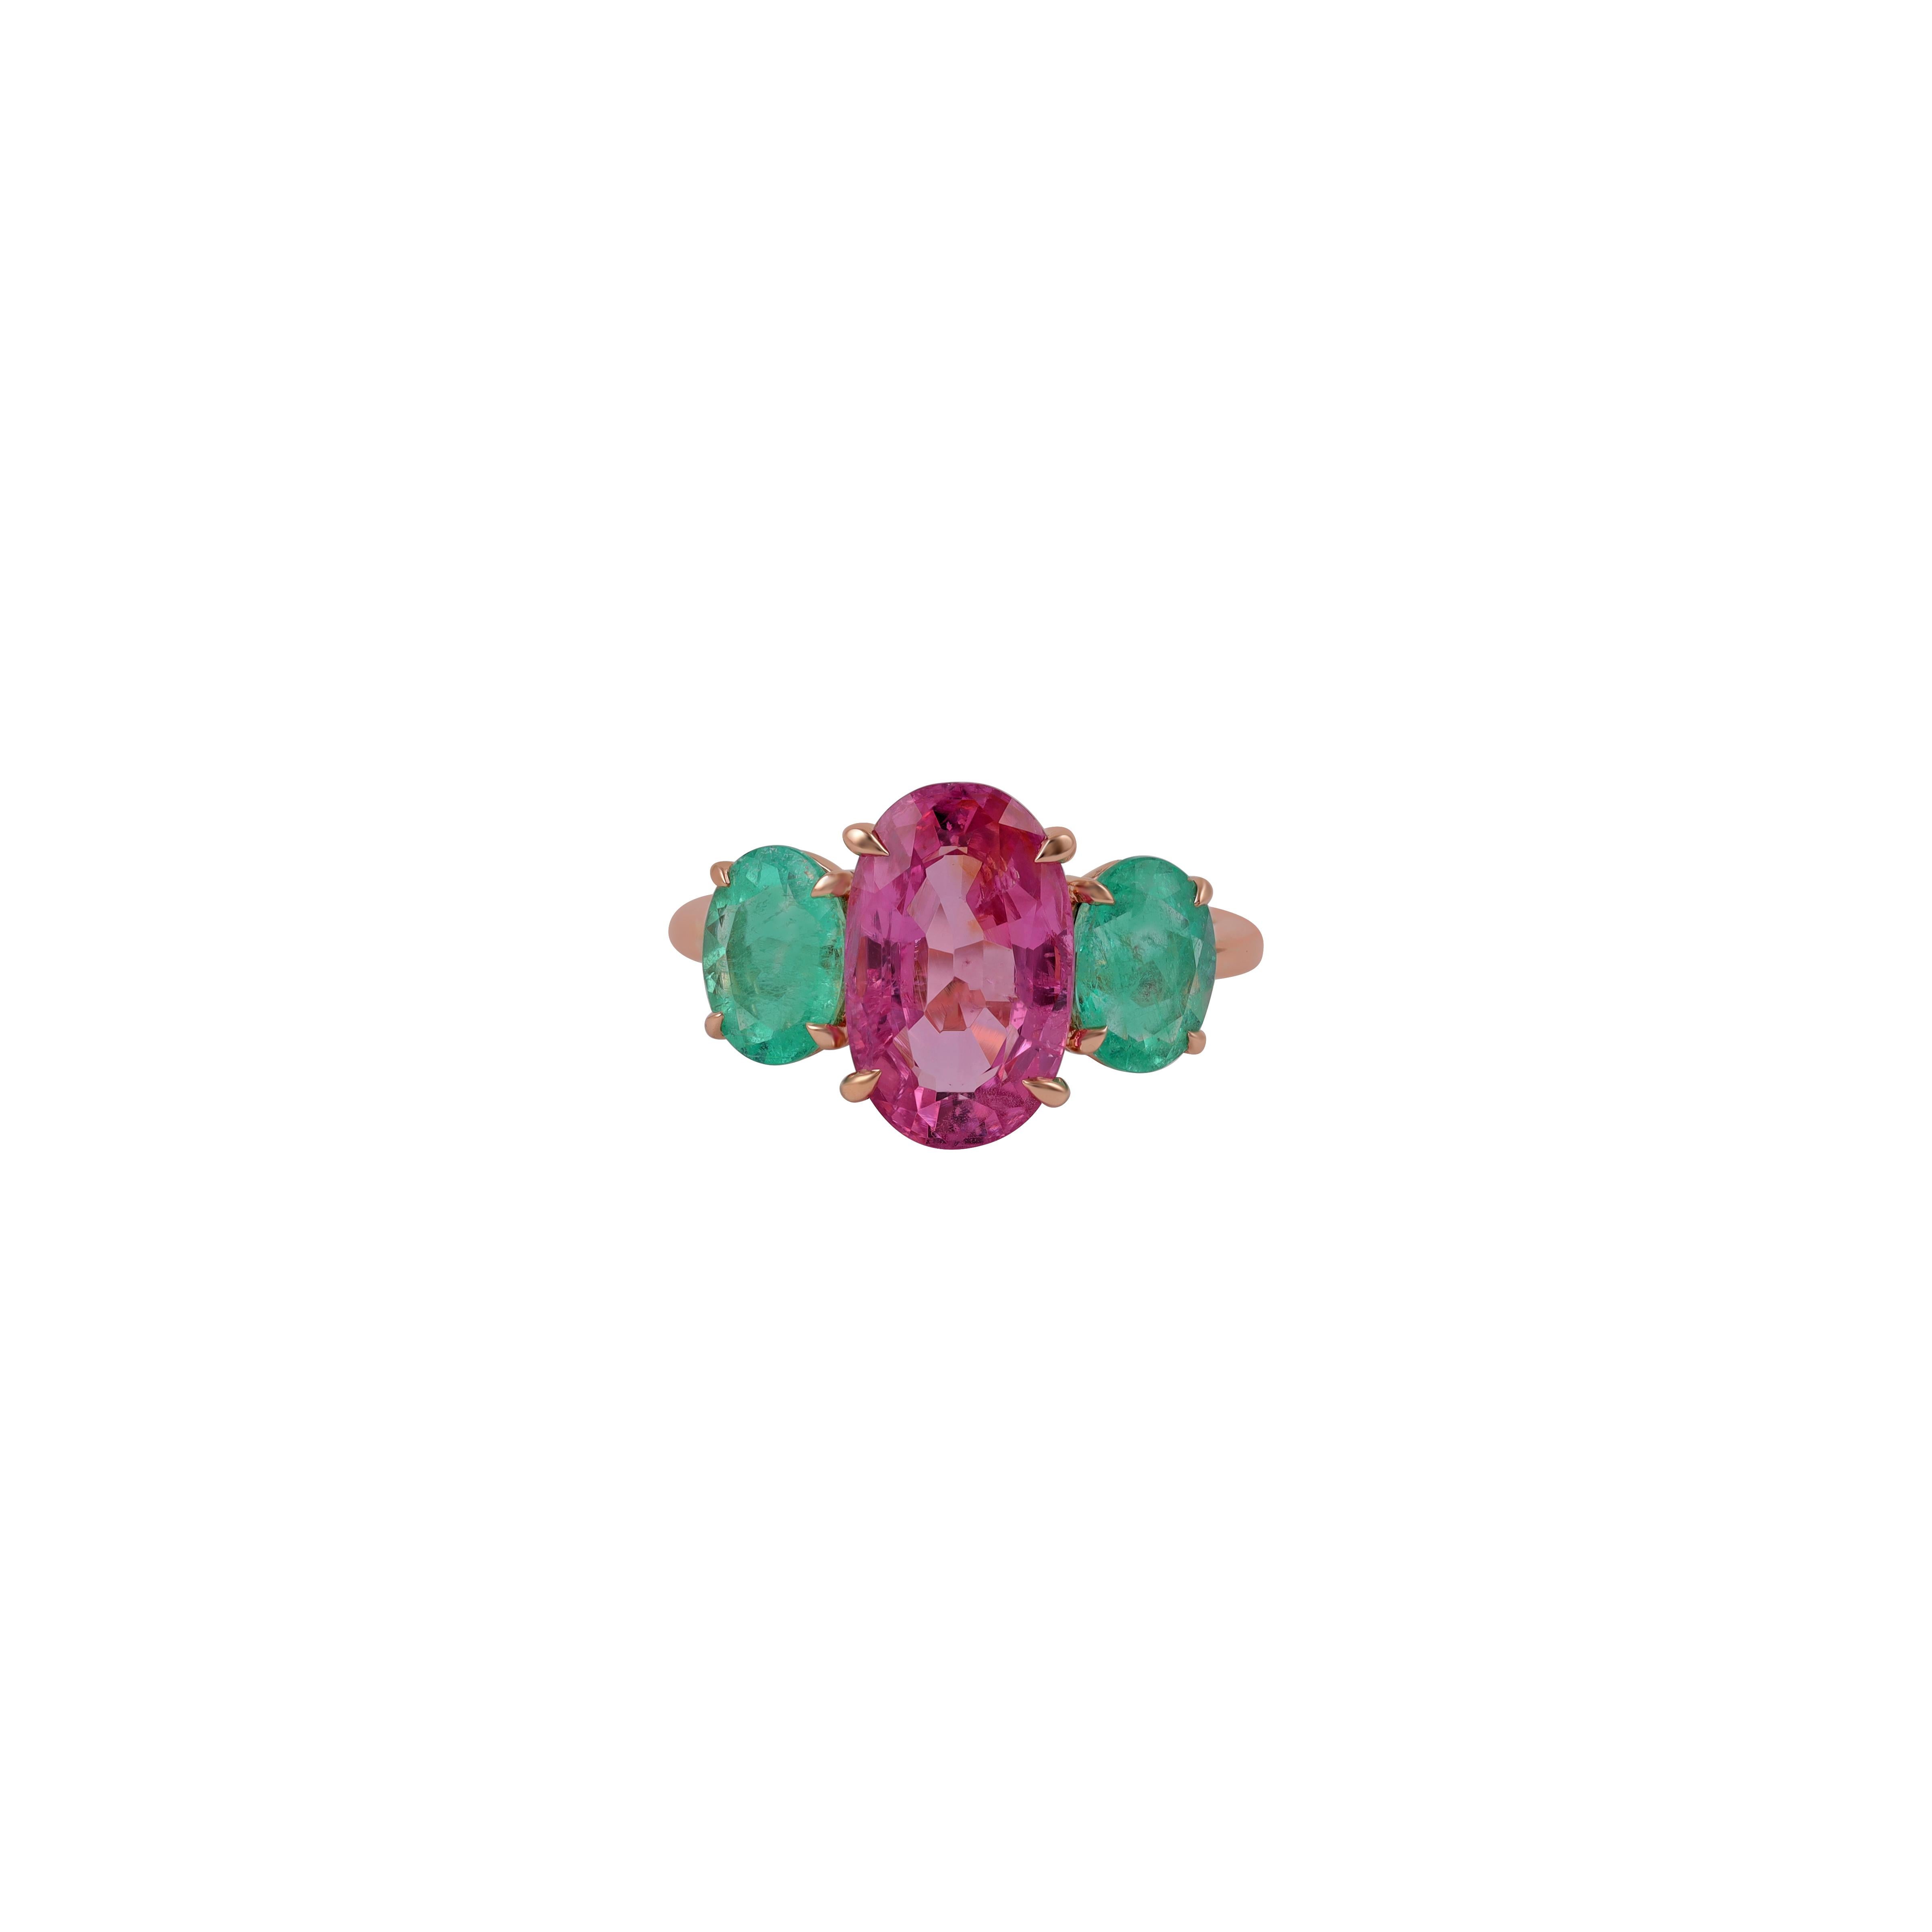 1.95 Carat Clear Colombian Emerald & Spinel  Ring in 18k Rose Gold 

Stunning, timeless and classy Unique Ring. Decorate yourself in luxury with this Gin & Grace Ring. The 18K Rose Gold jewelry boasts with 2 pcs 1.95 carat clear Colombian Emerald